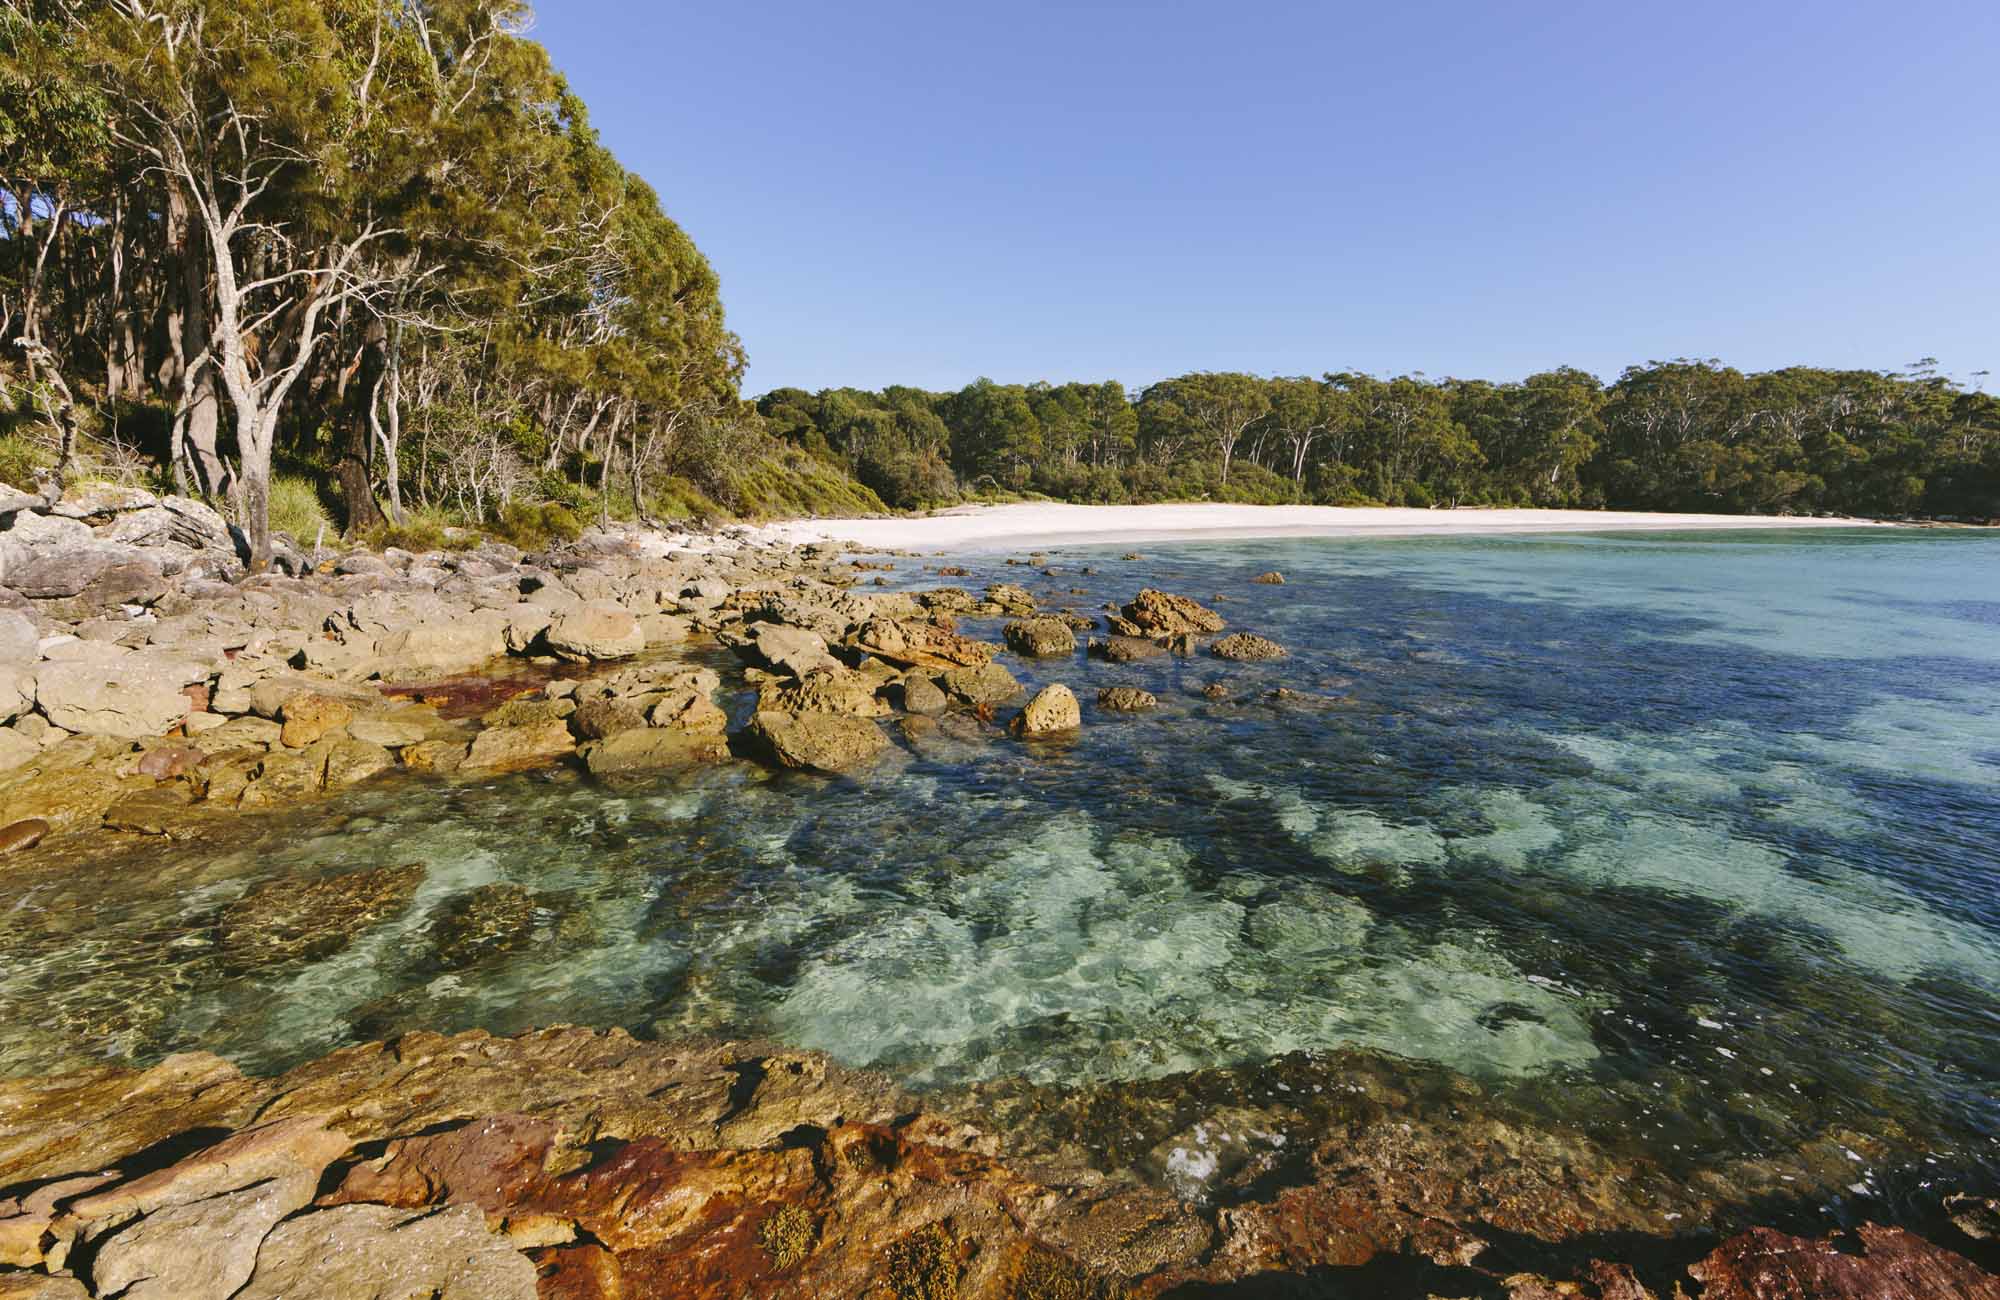 Greenfield Beach, Jervis Bay National Park. Photo: David Finnegan/NSW Government